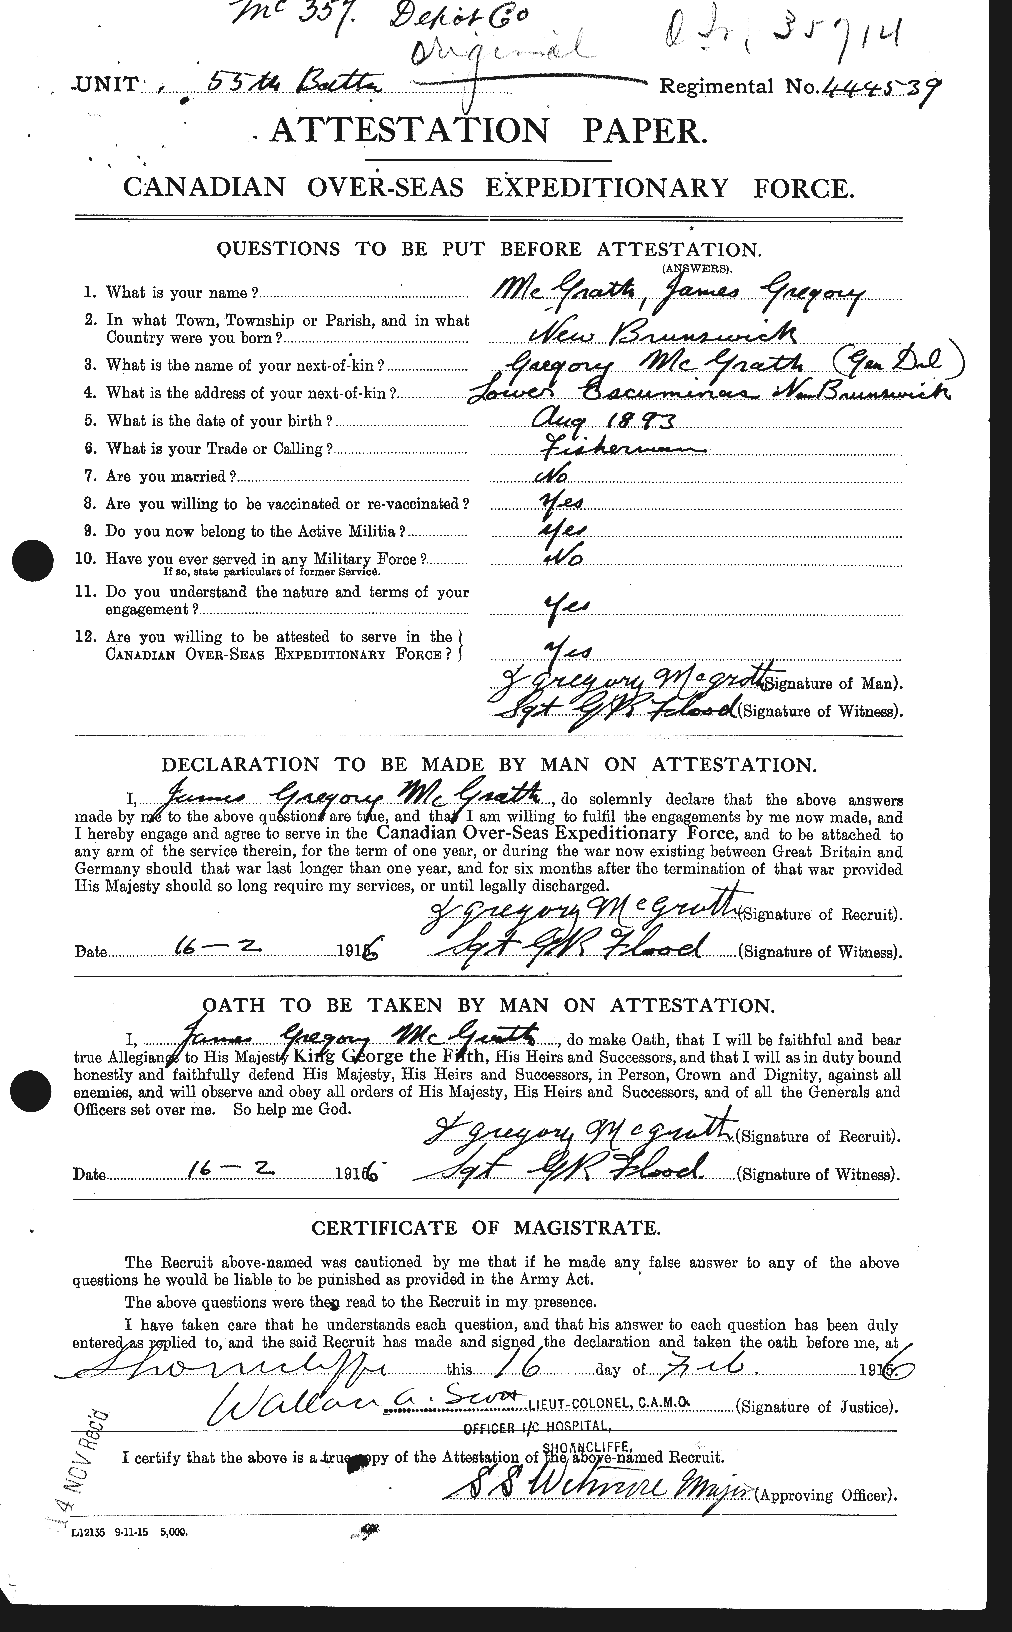 Personnel Records of the First World War - CEF 523586a